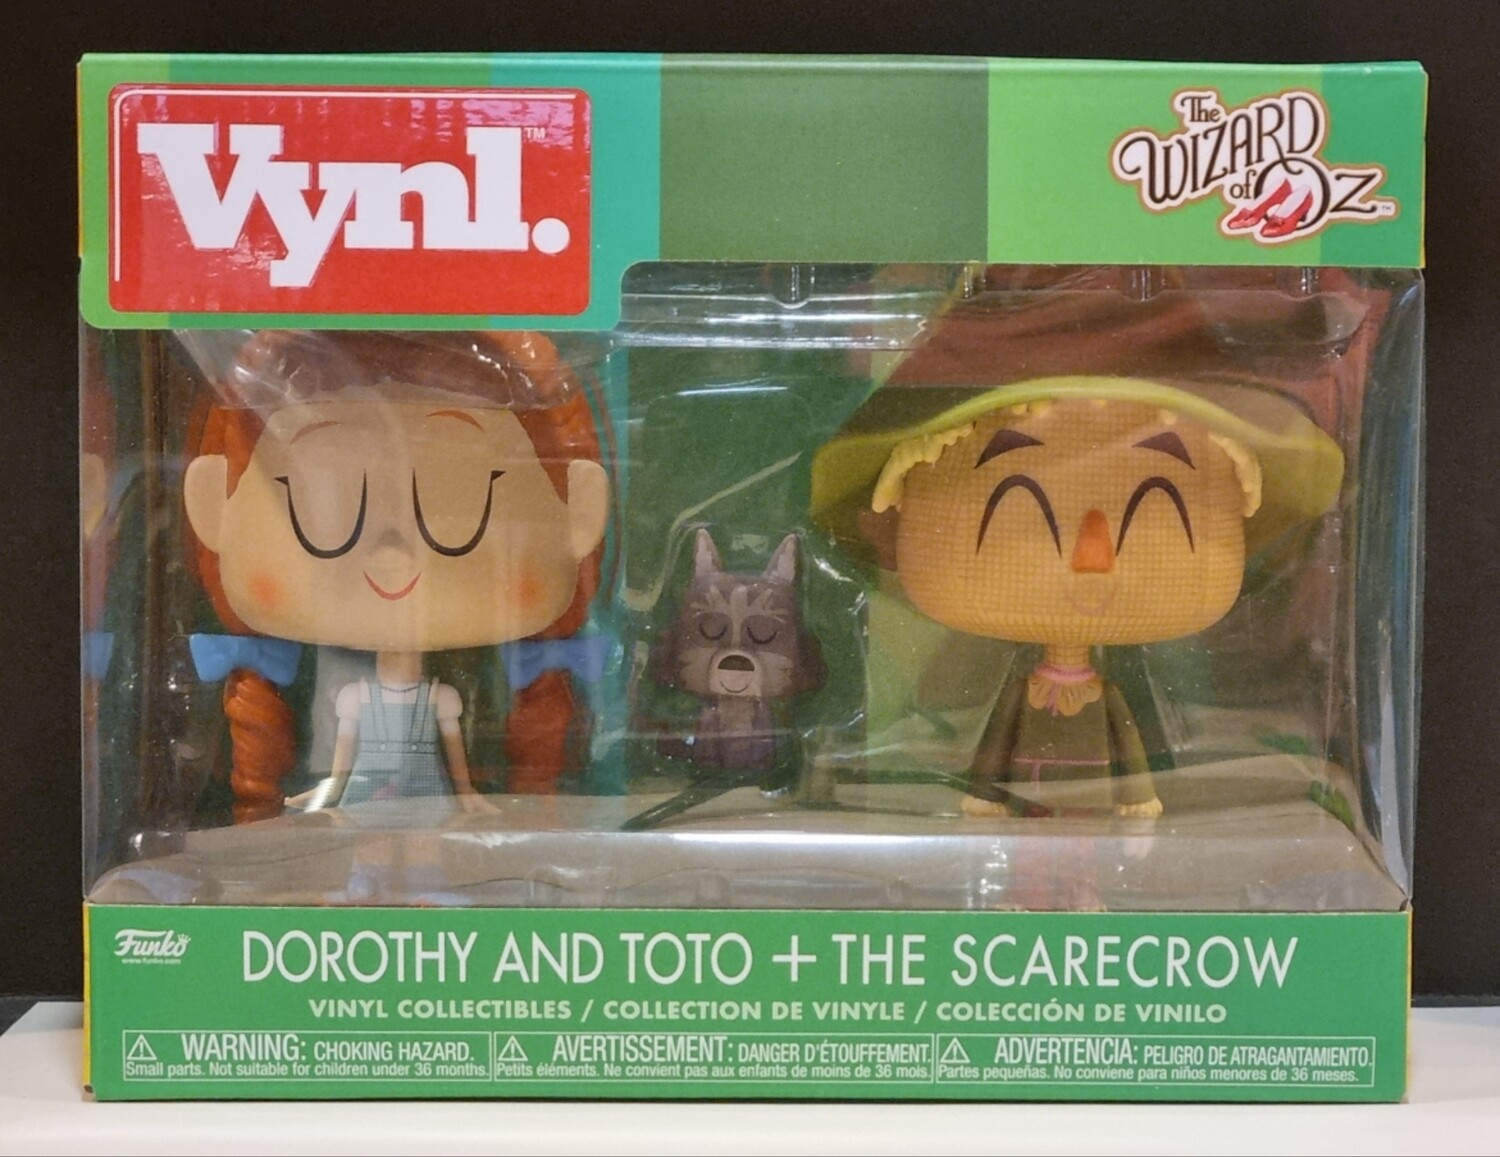 Funko Vynl, Dorothy and Toto + The Scarecrow, The Wizard of Oz